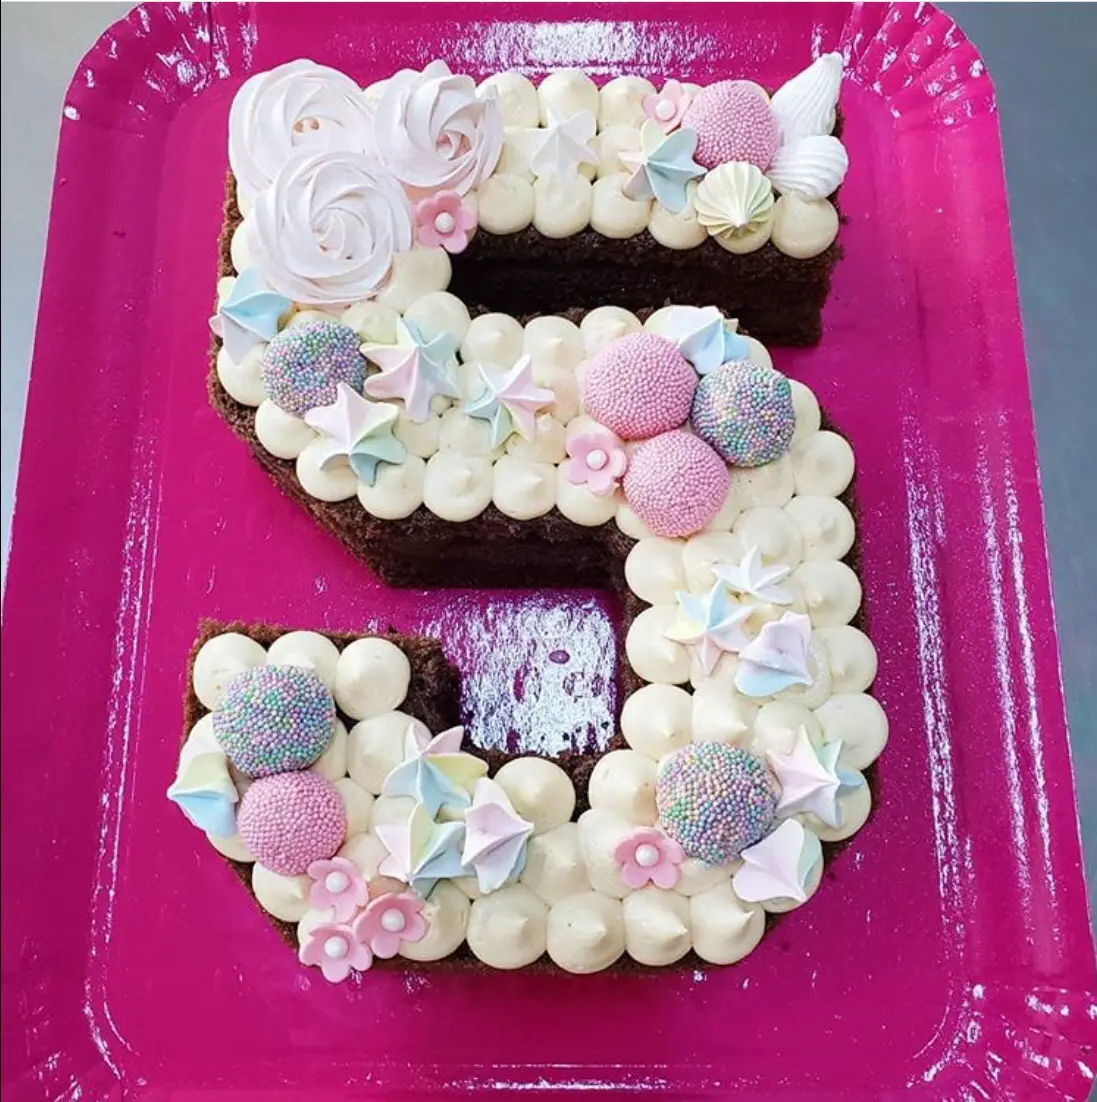 Beautiful Number Cake Designs - The Wonder Cottage